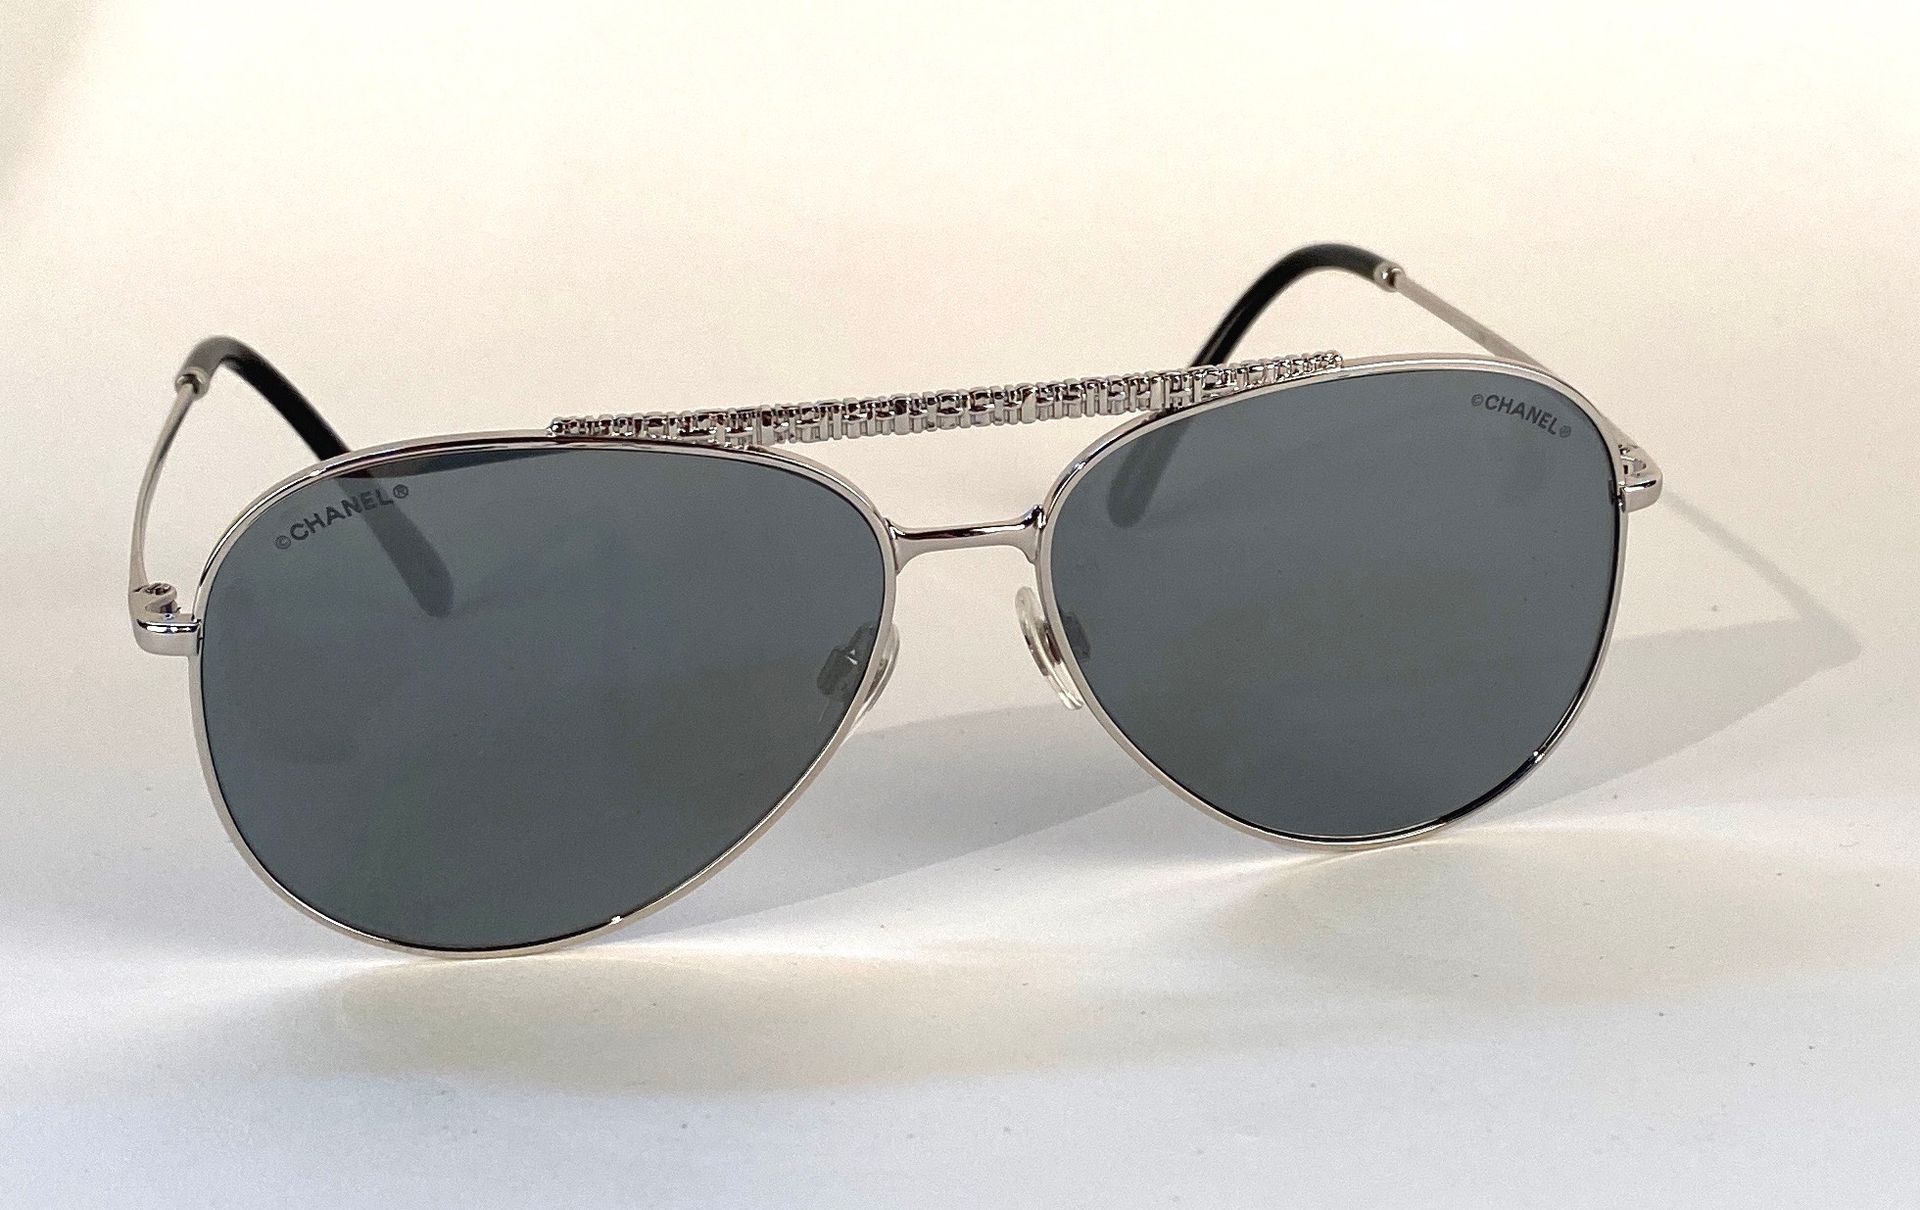 CHANEL. Pilot shape sunglasses with silver metal frame, …